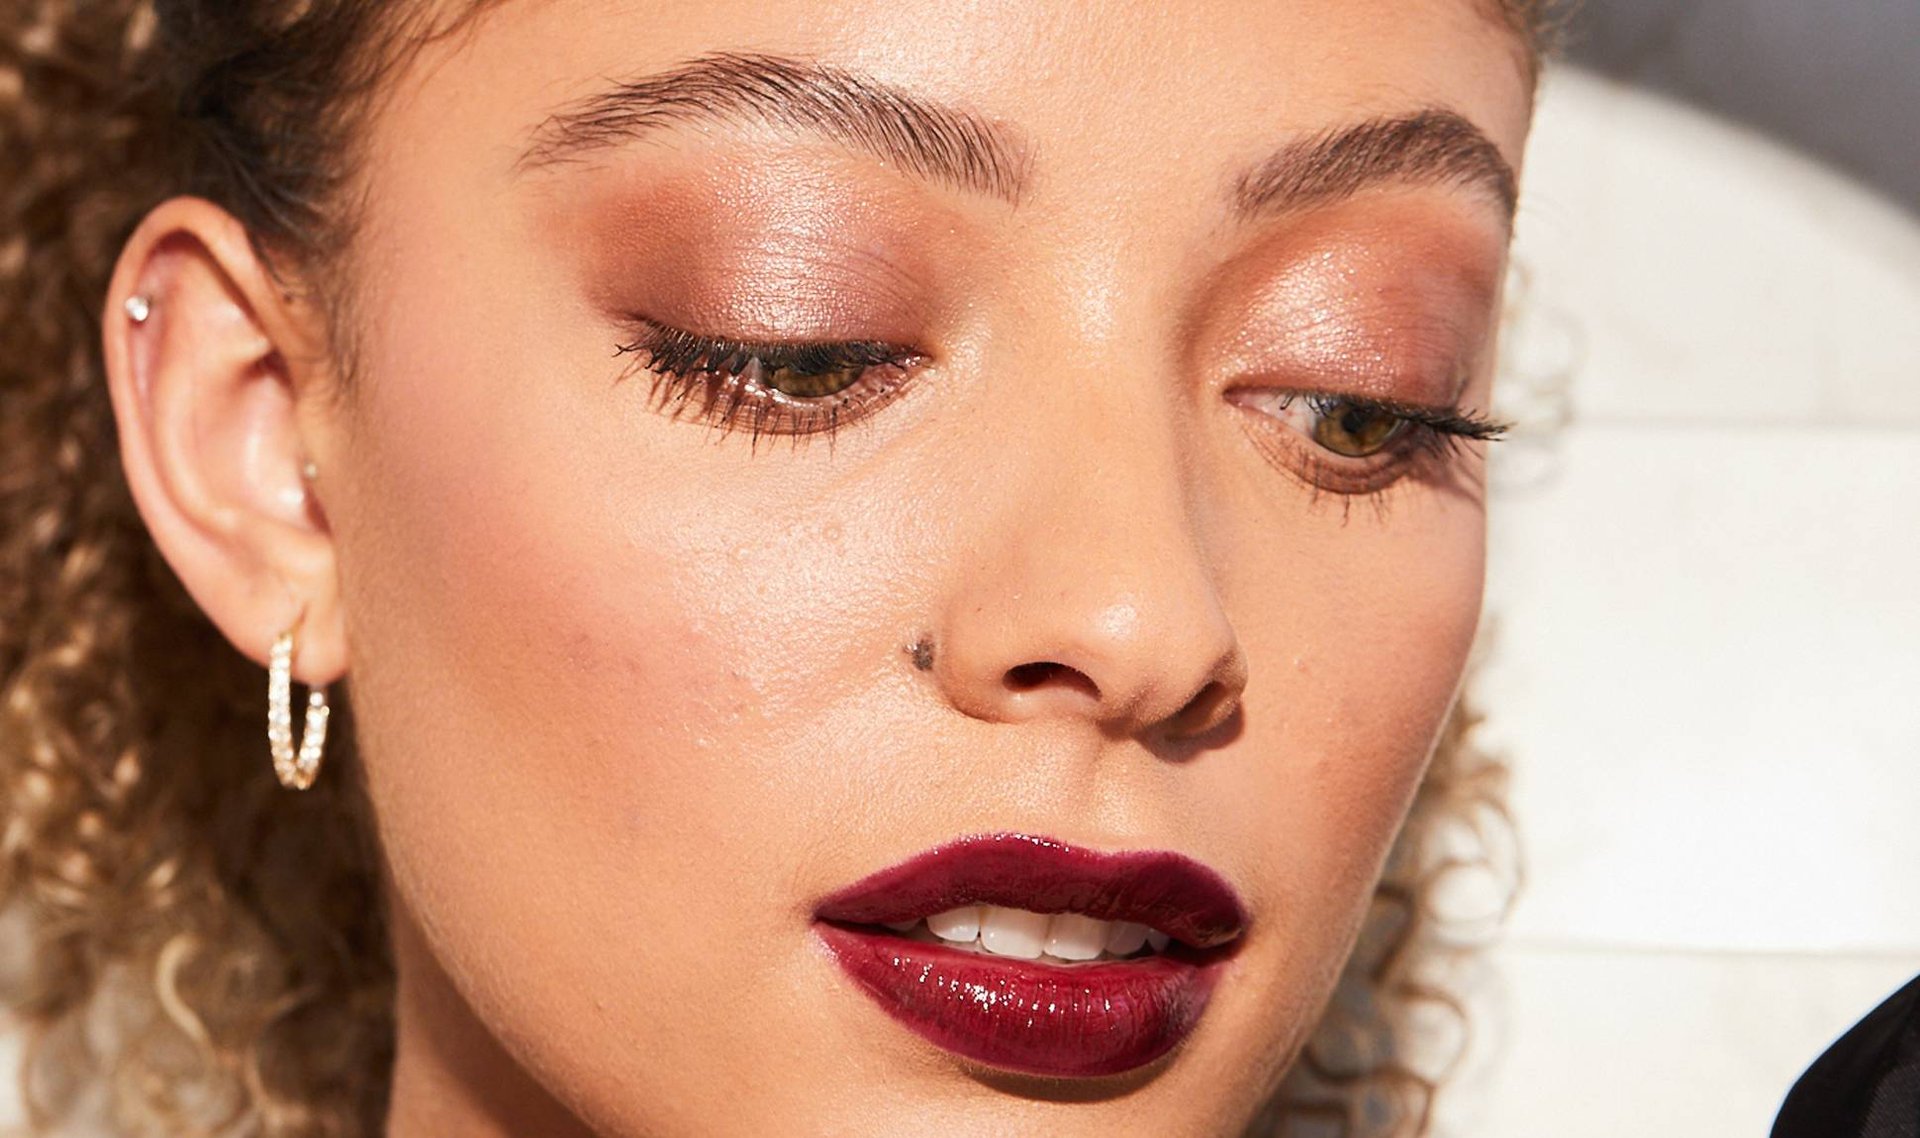 How to Achieve a Flawless Complexion in Time for Valentine’s Day